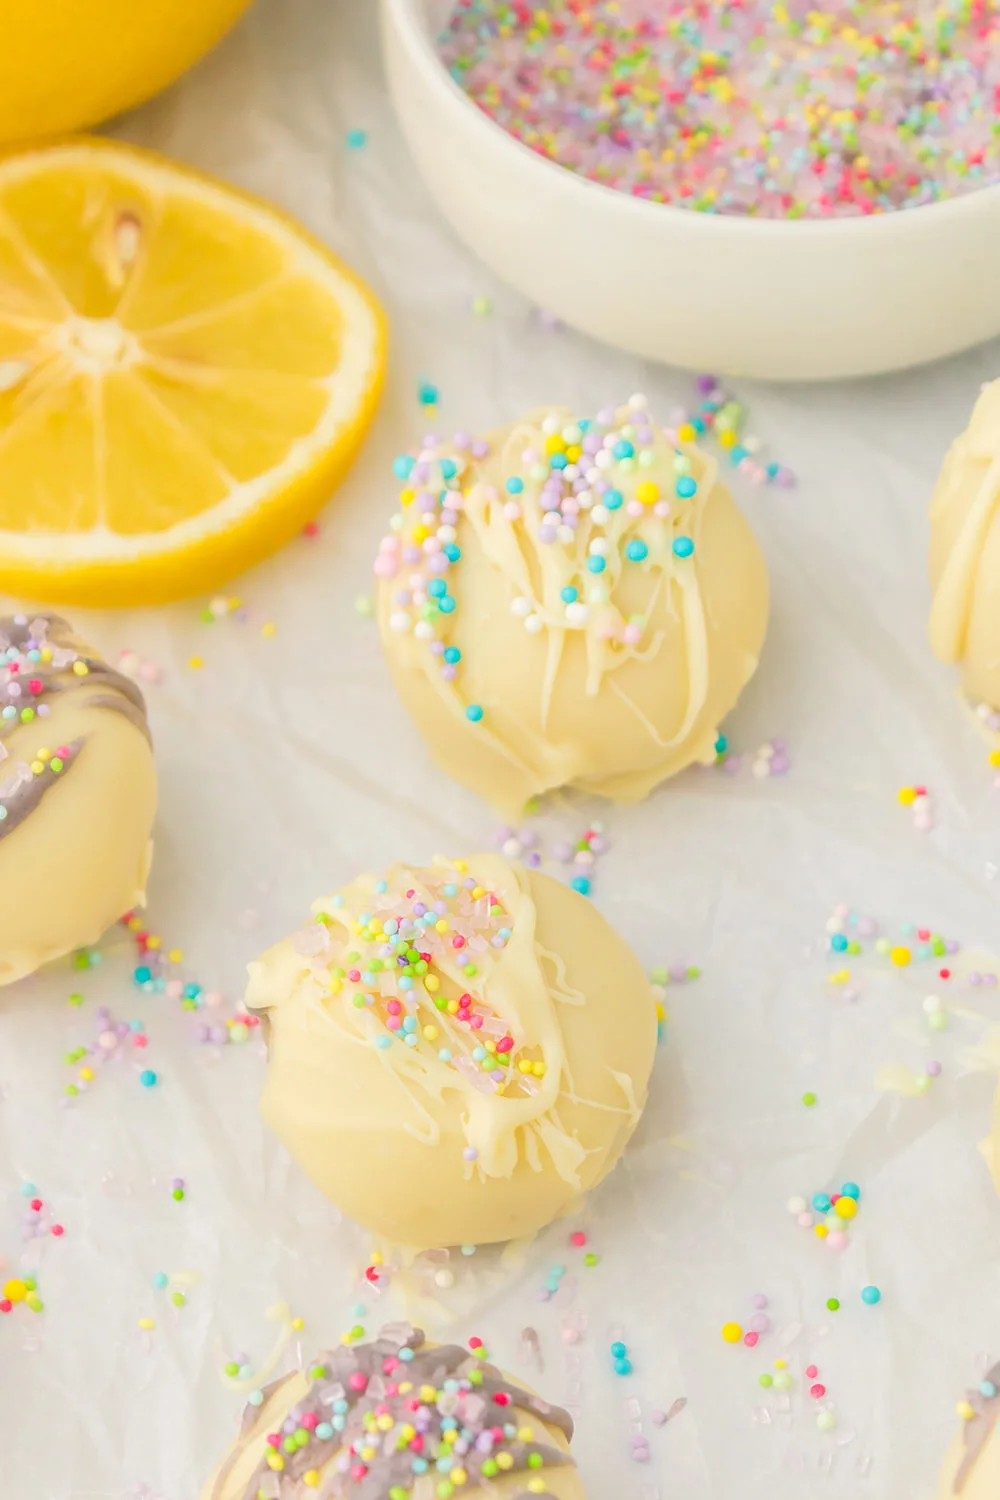 Lemon oreo truffles topped with spring colored sprinkles.